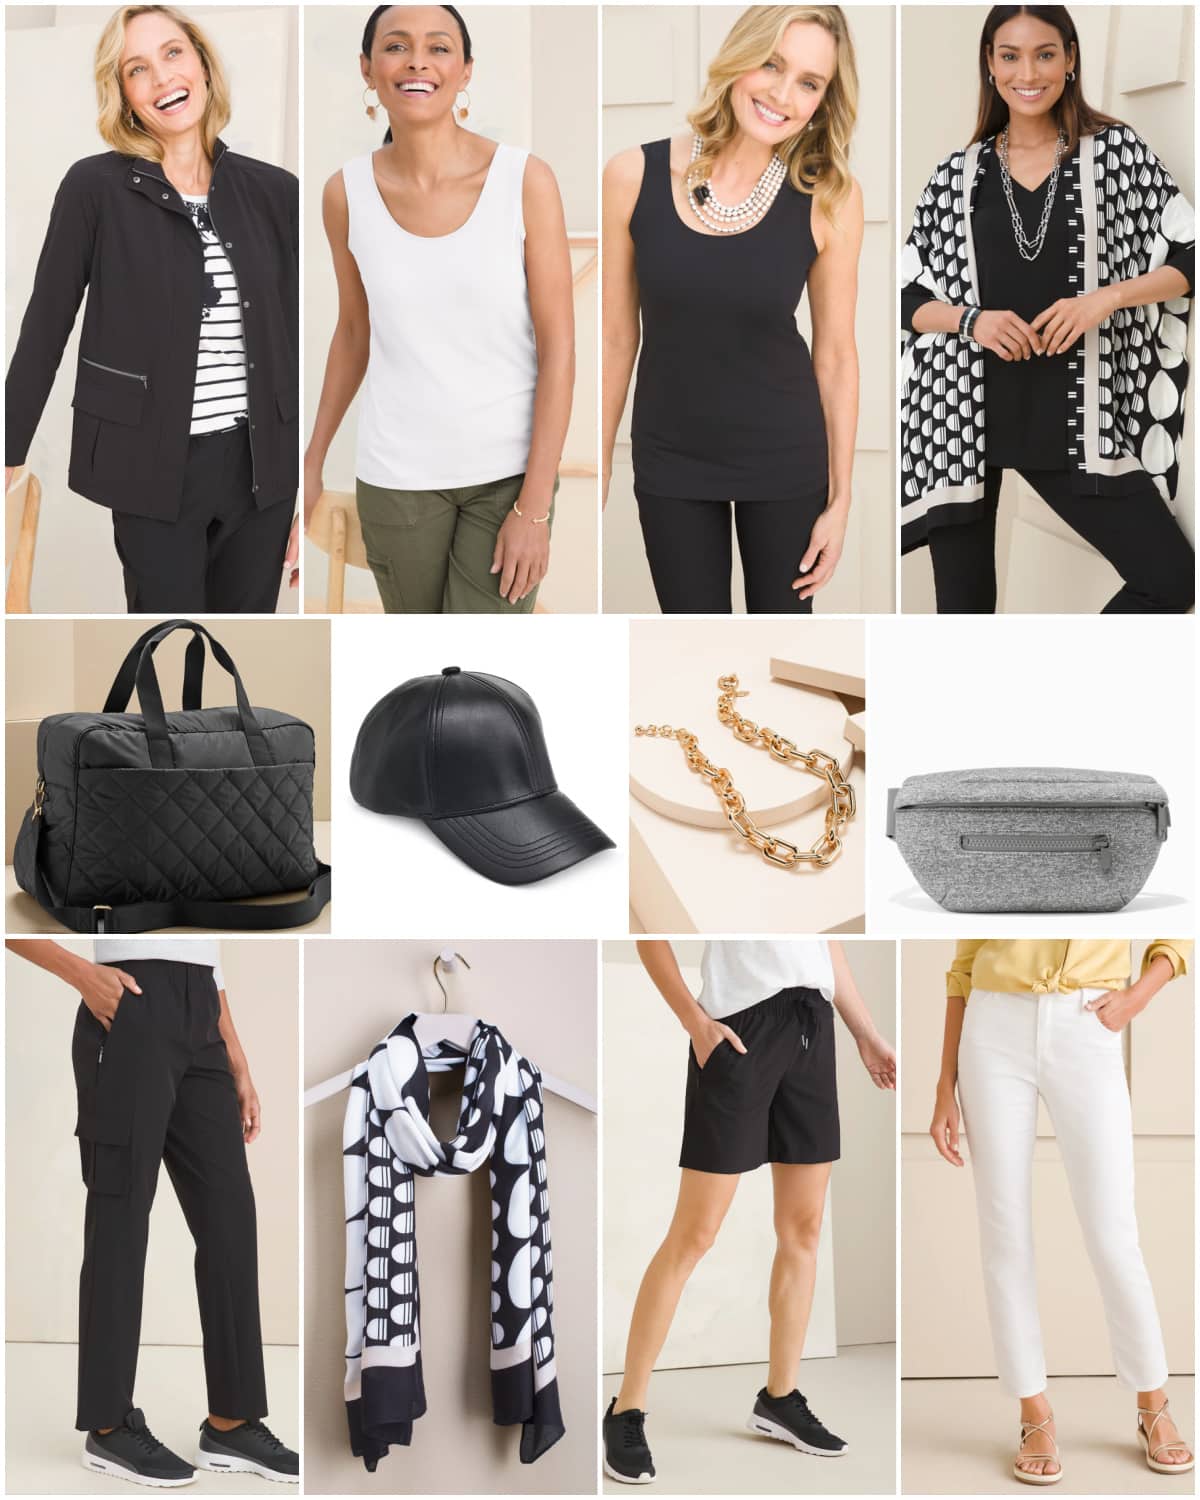 Vacation Capsule Wardrobe with Chico’s Zenergy Collection: 6 Pieces, 12+ Great Looks